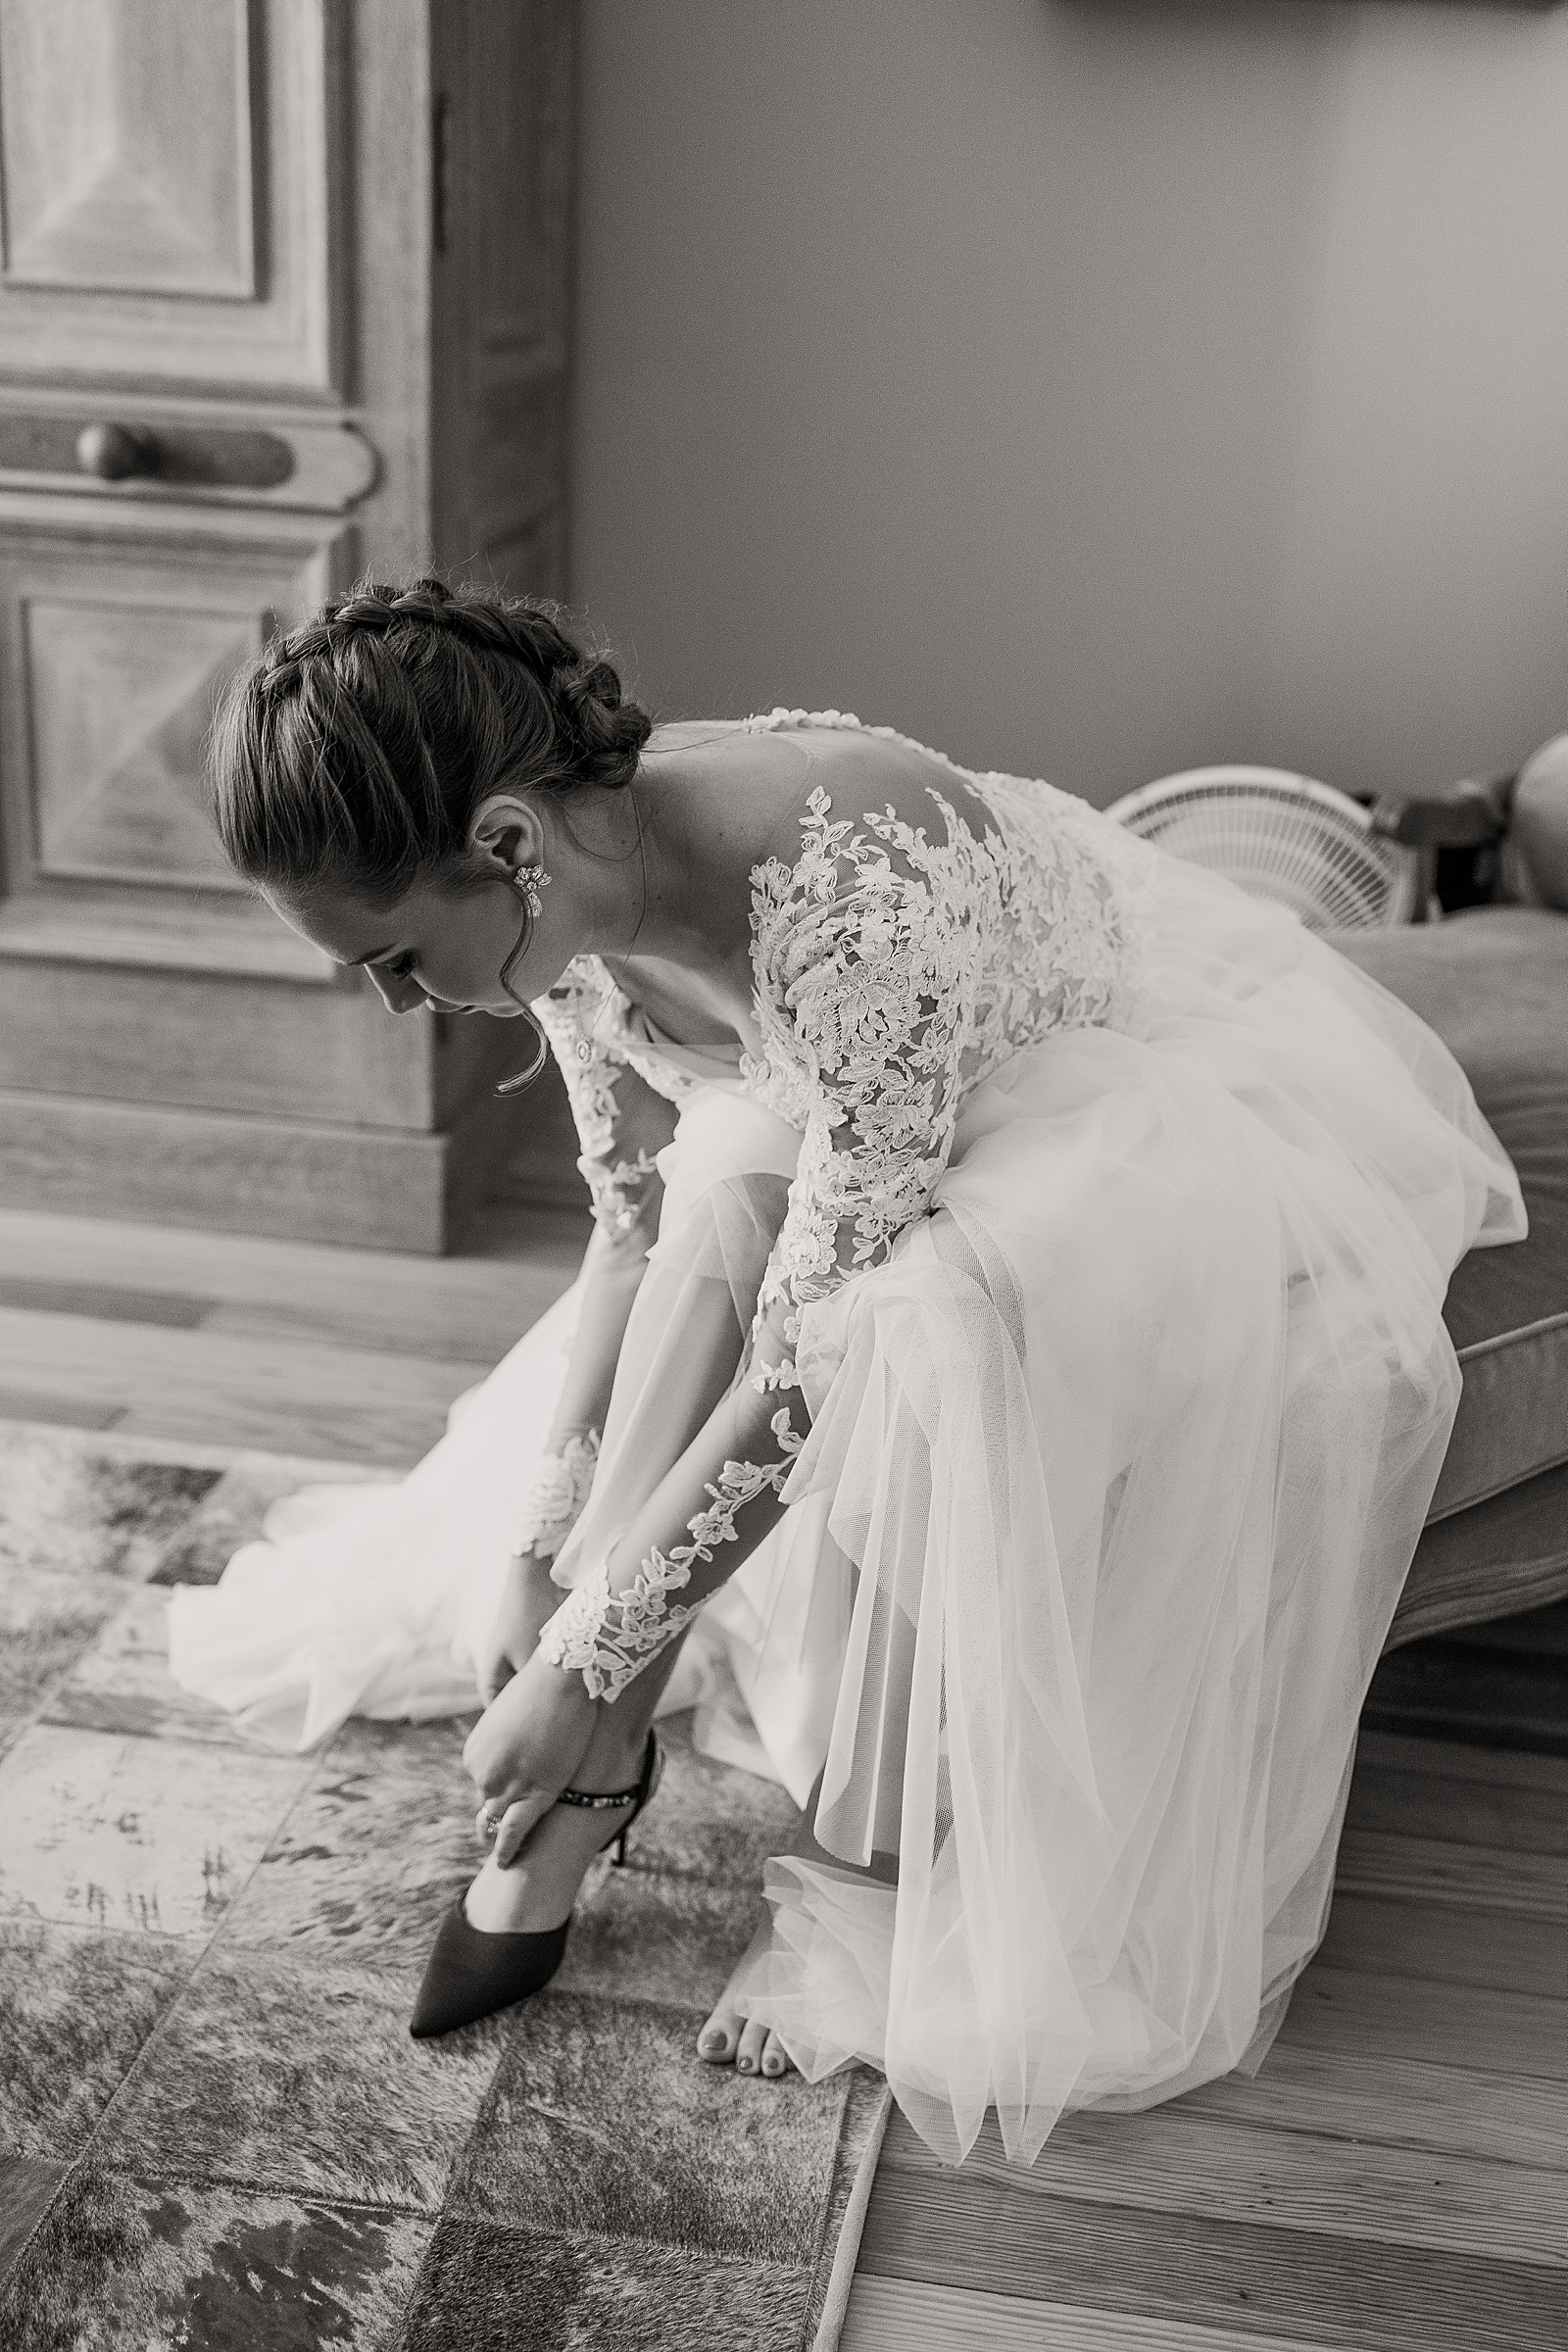 How to Choose Getting Ready Location | Bride Putting Shoes On